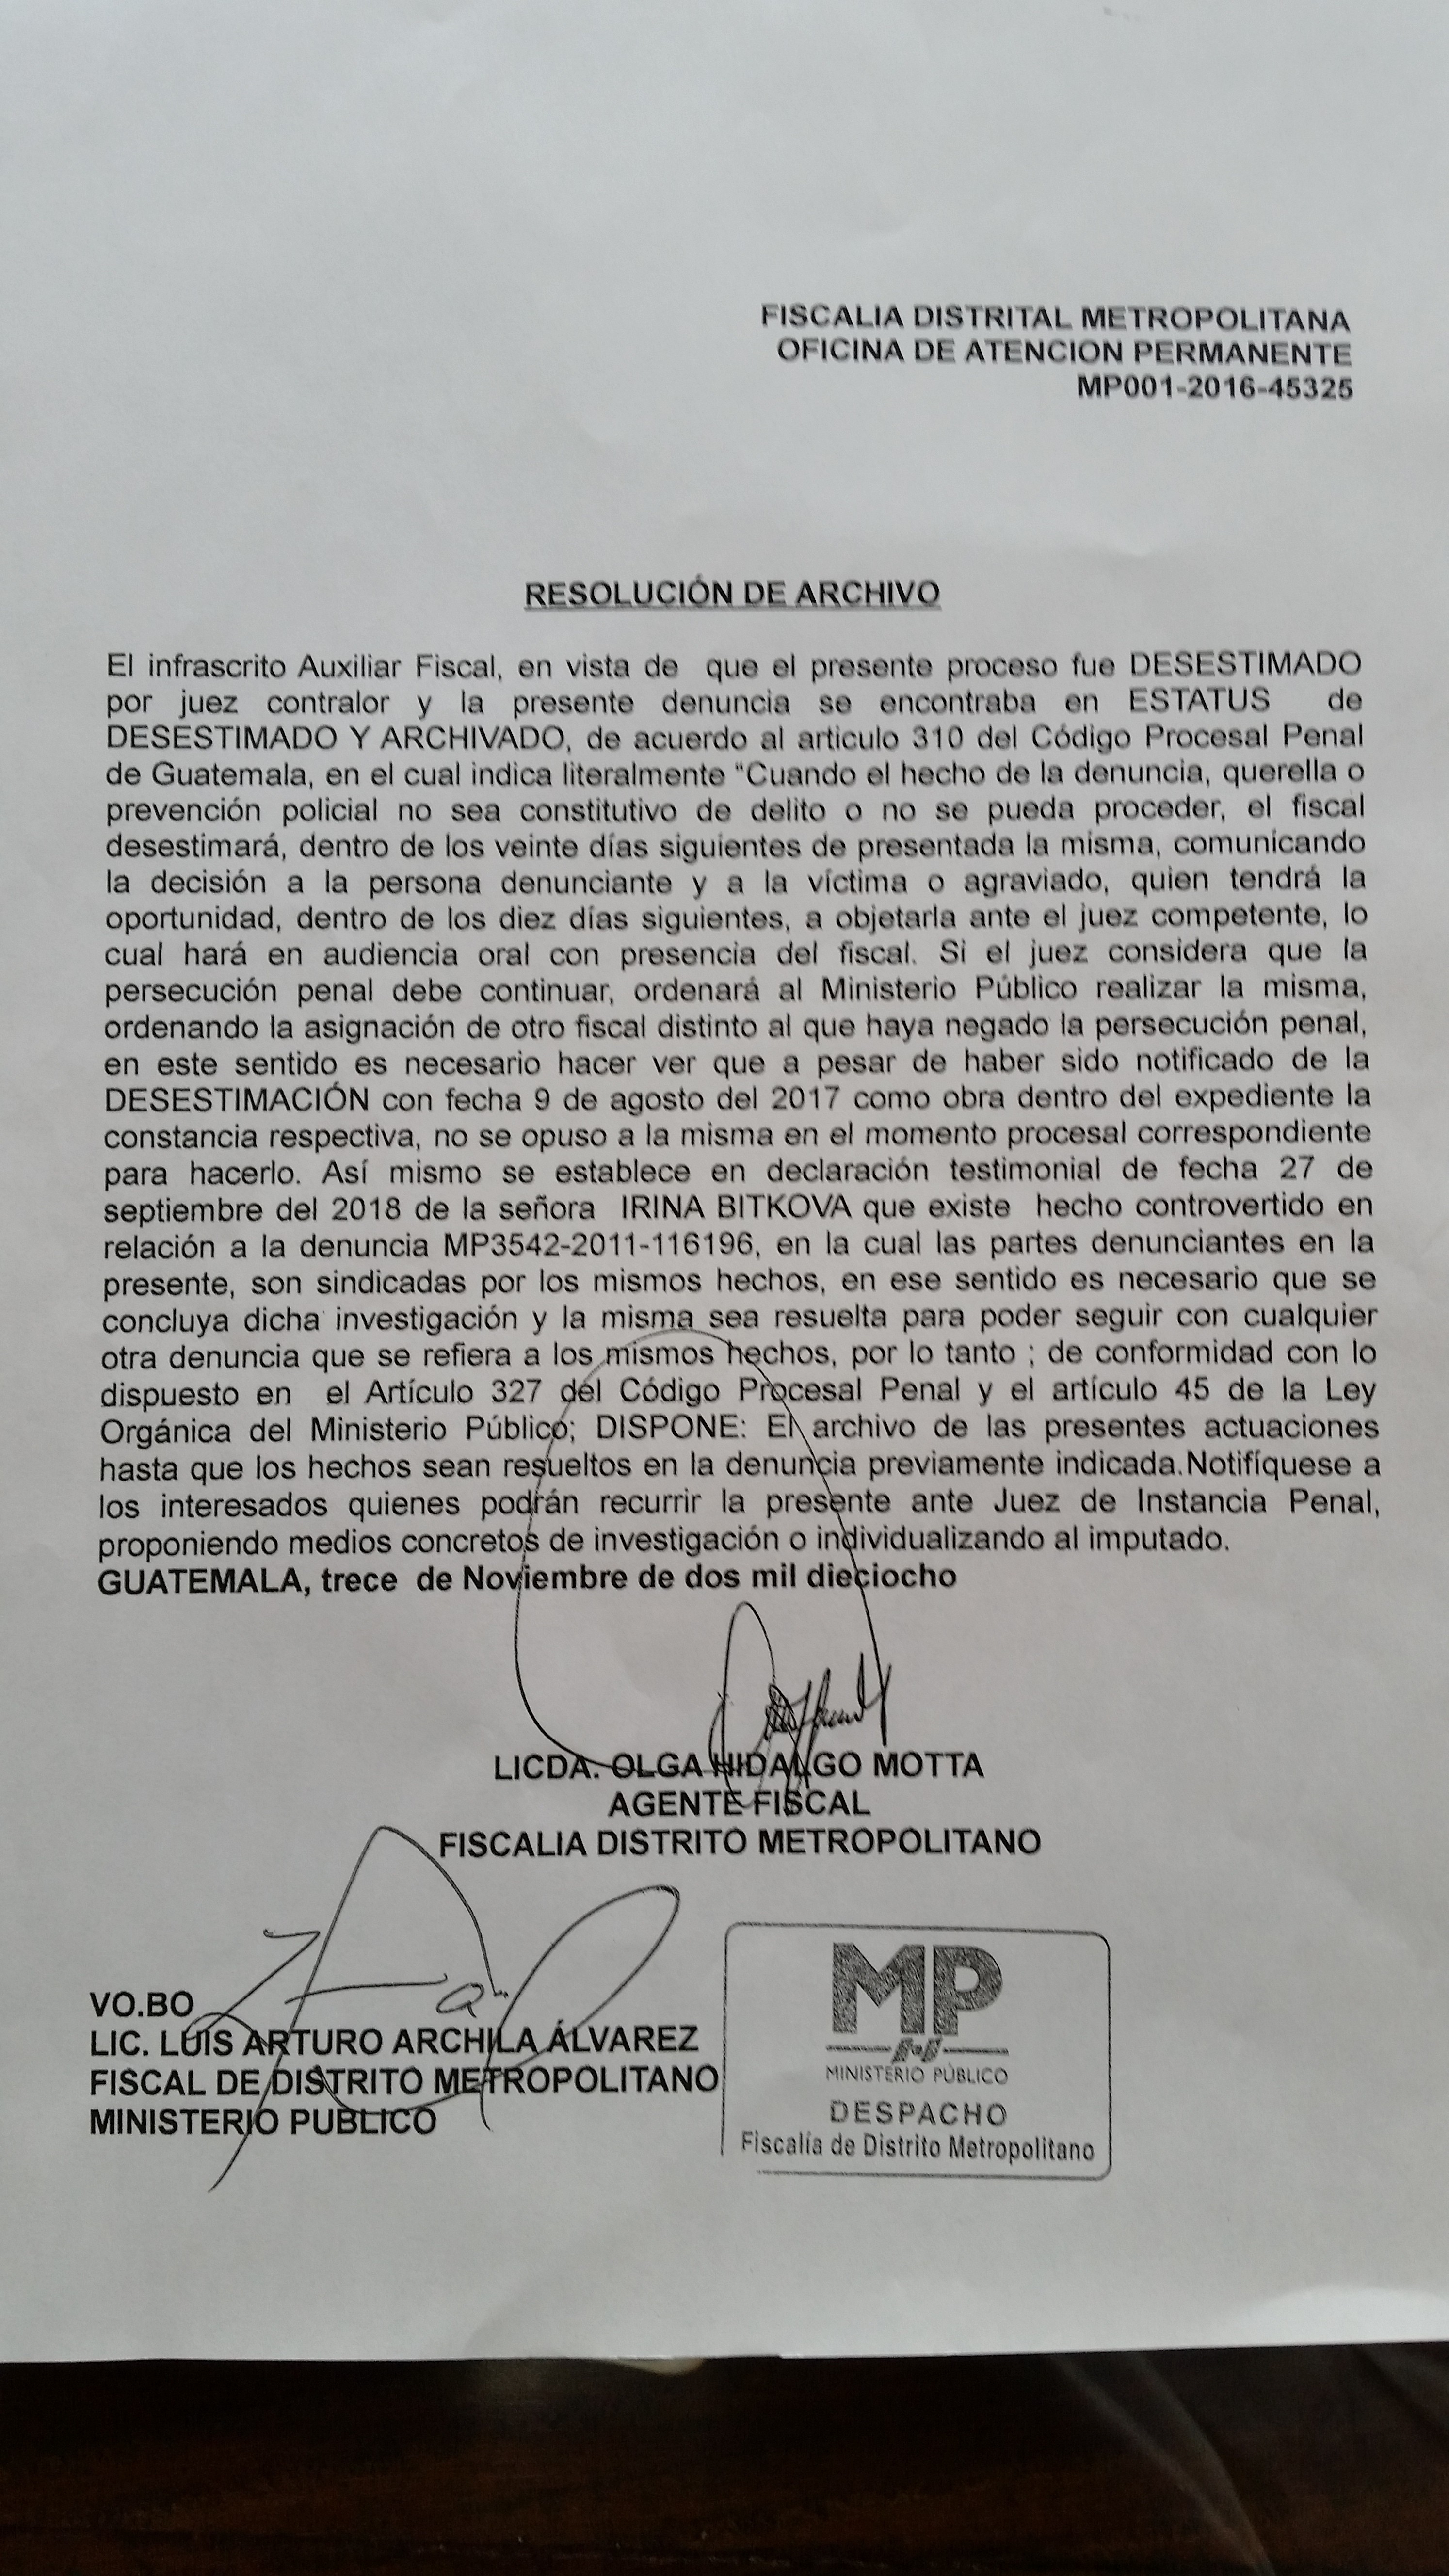 The resolution of the case file against Mayra Veliz